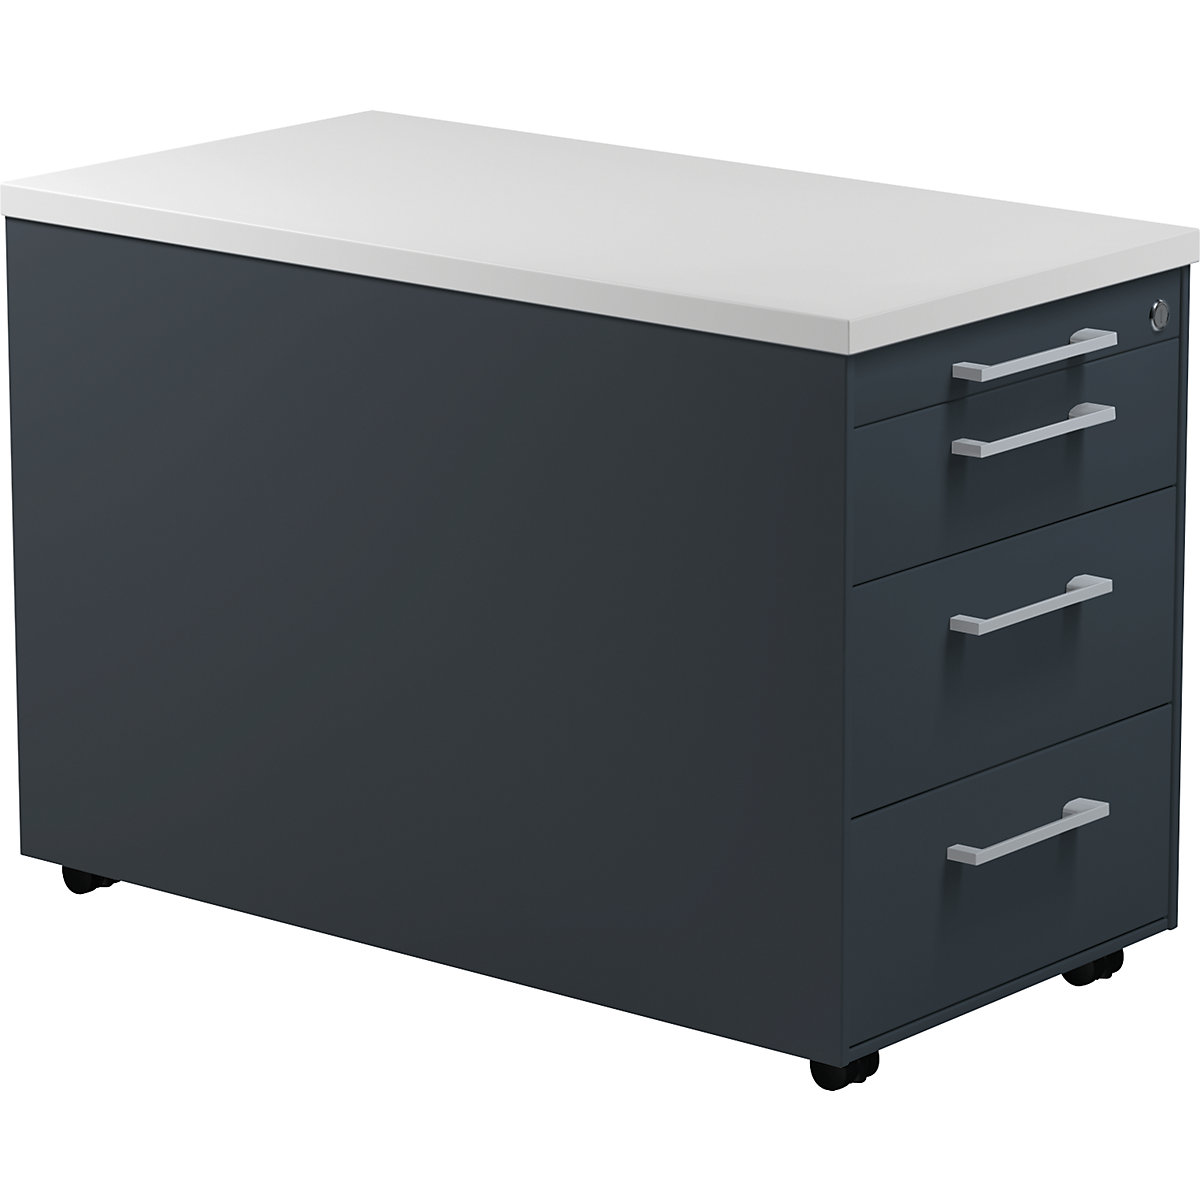 Mobile pedestal on castors – mauser, HxD 529 x 800 mm, 3 drawers, charcoal / charcoal / light grey-1